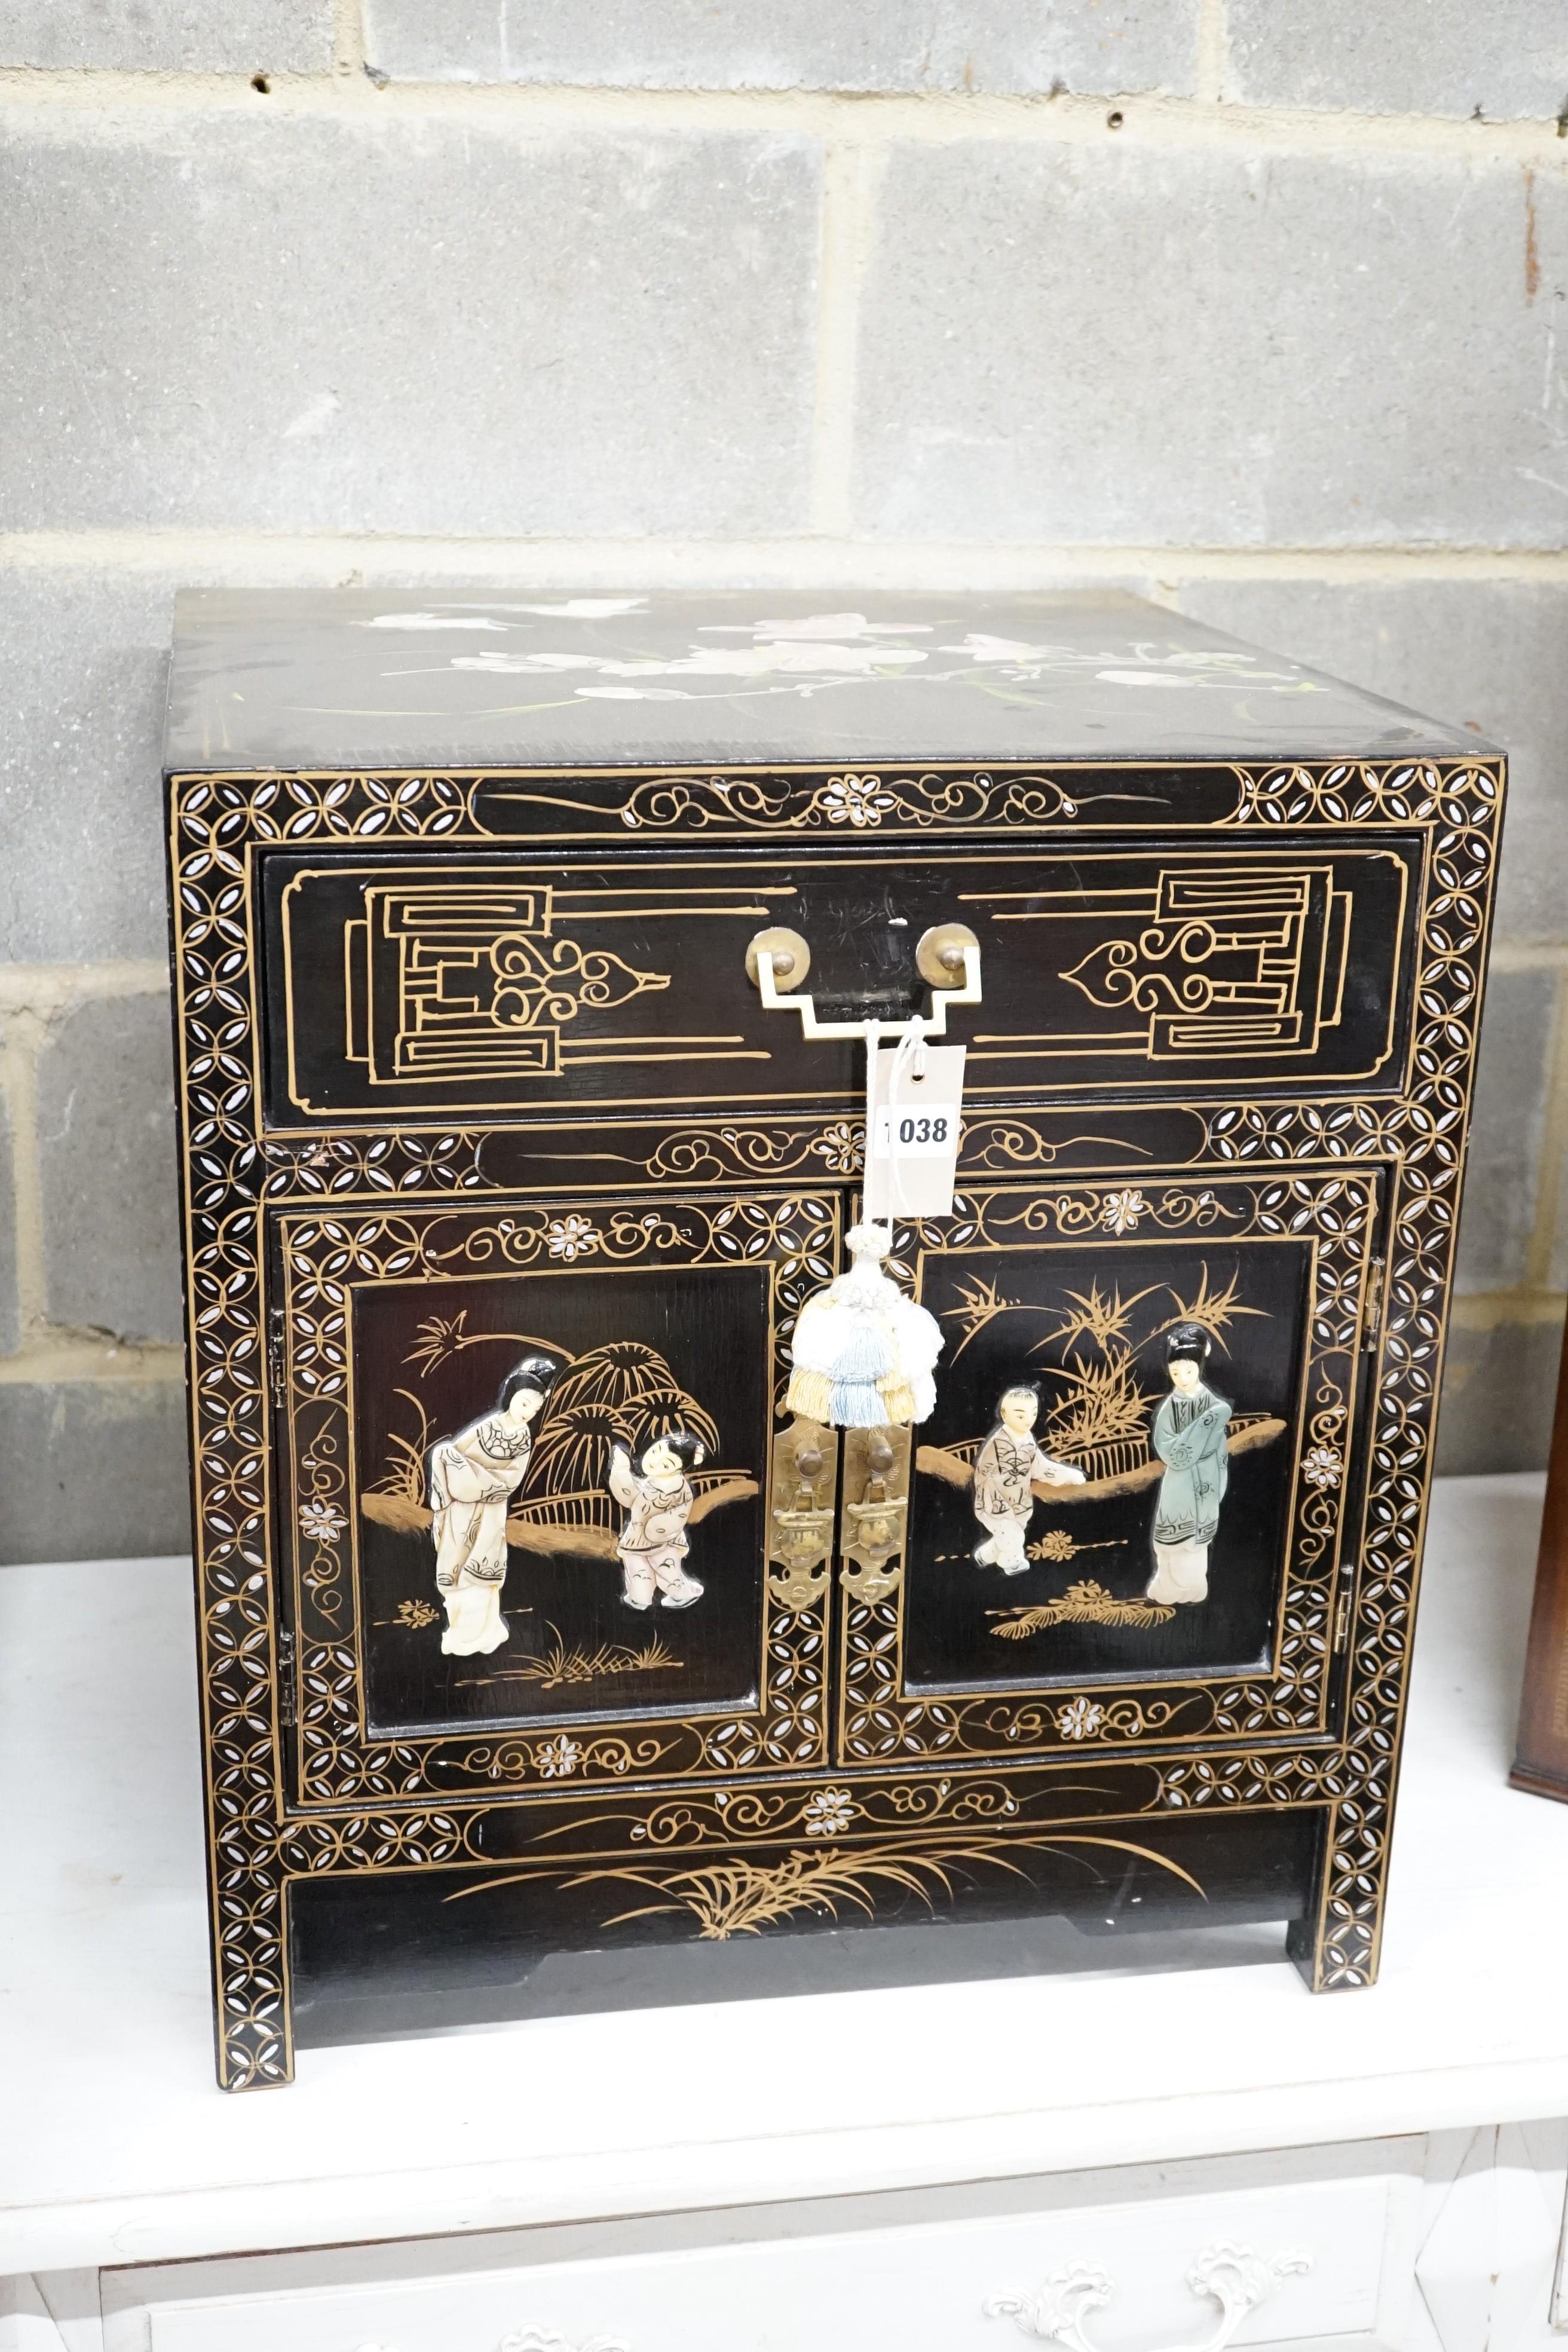 A Chinese black-lacquered brass-mounted small two-door cabinet, the door panels decorated with figures, width 51cm, depth 51cm, height 56cm.